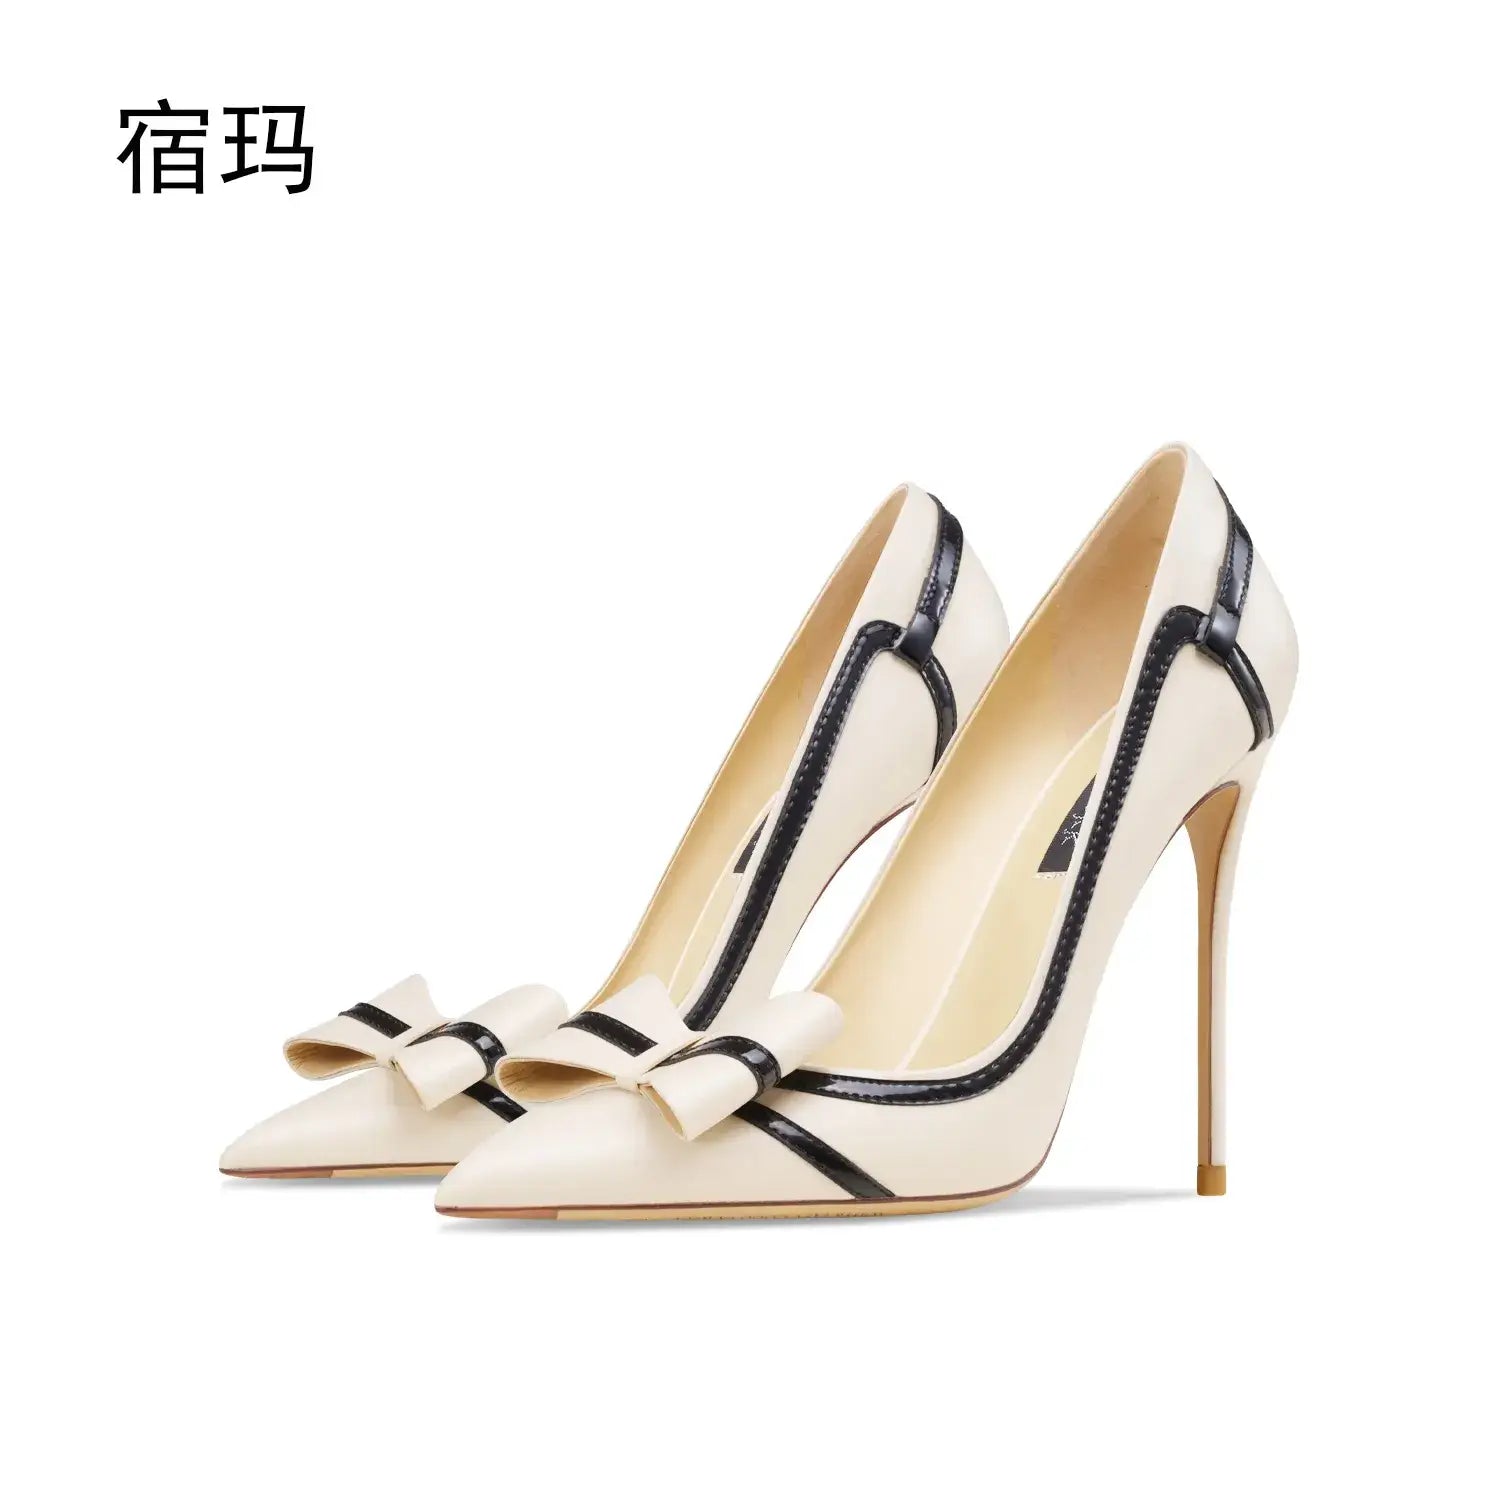 Real leather butterfly-knot high heels stiletto pumps - off white 6cm / 33 / gb